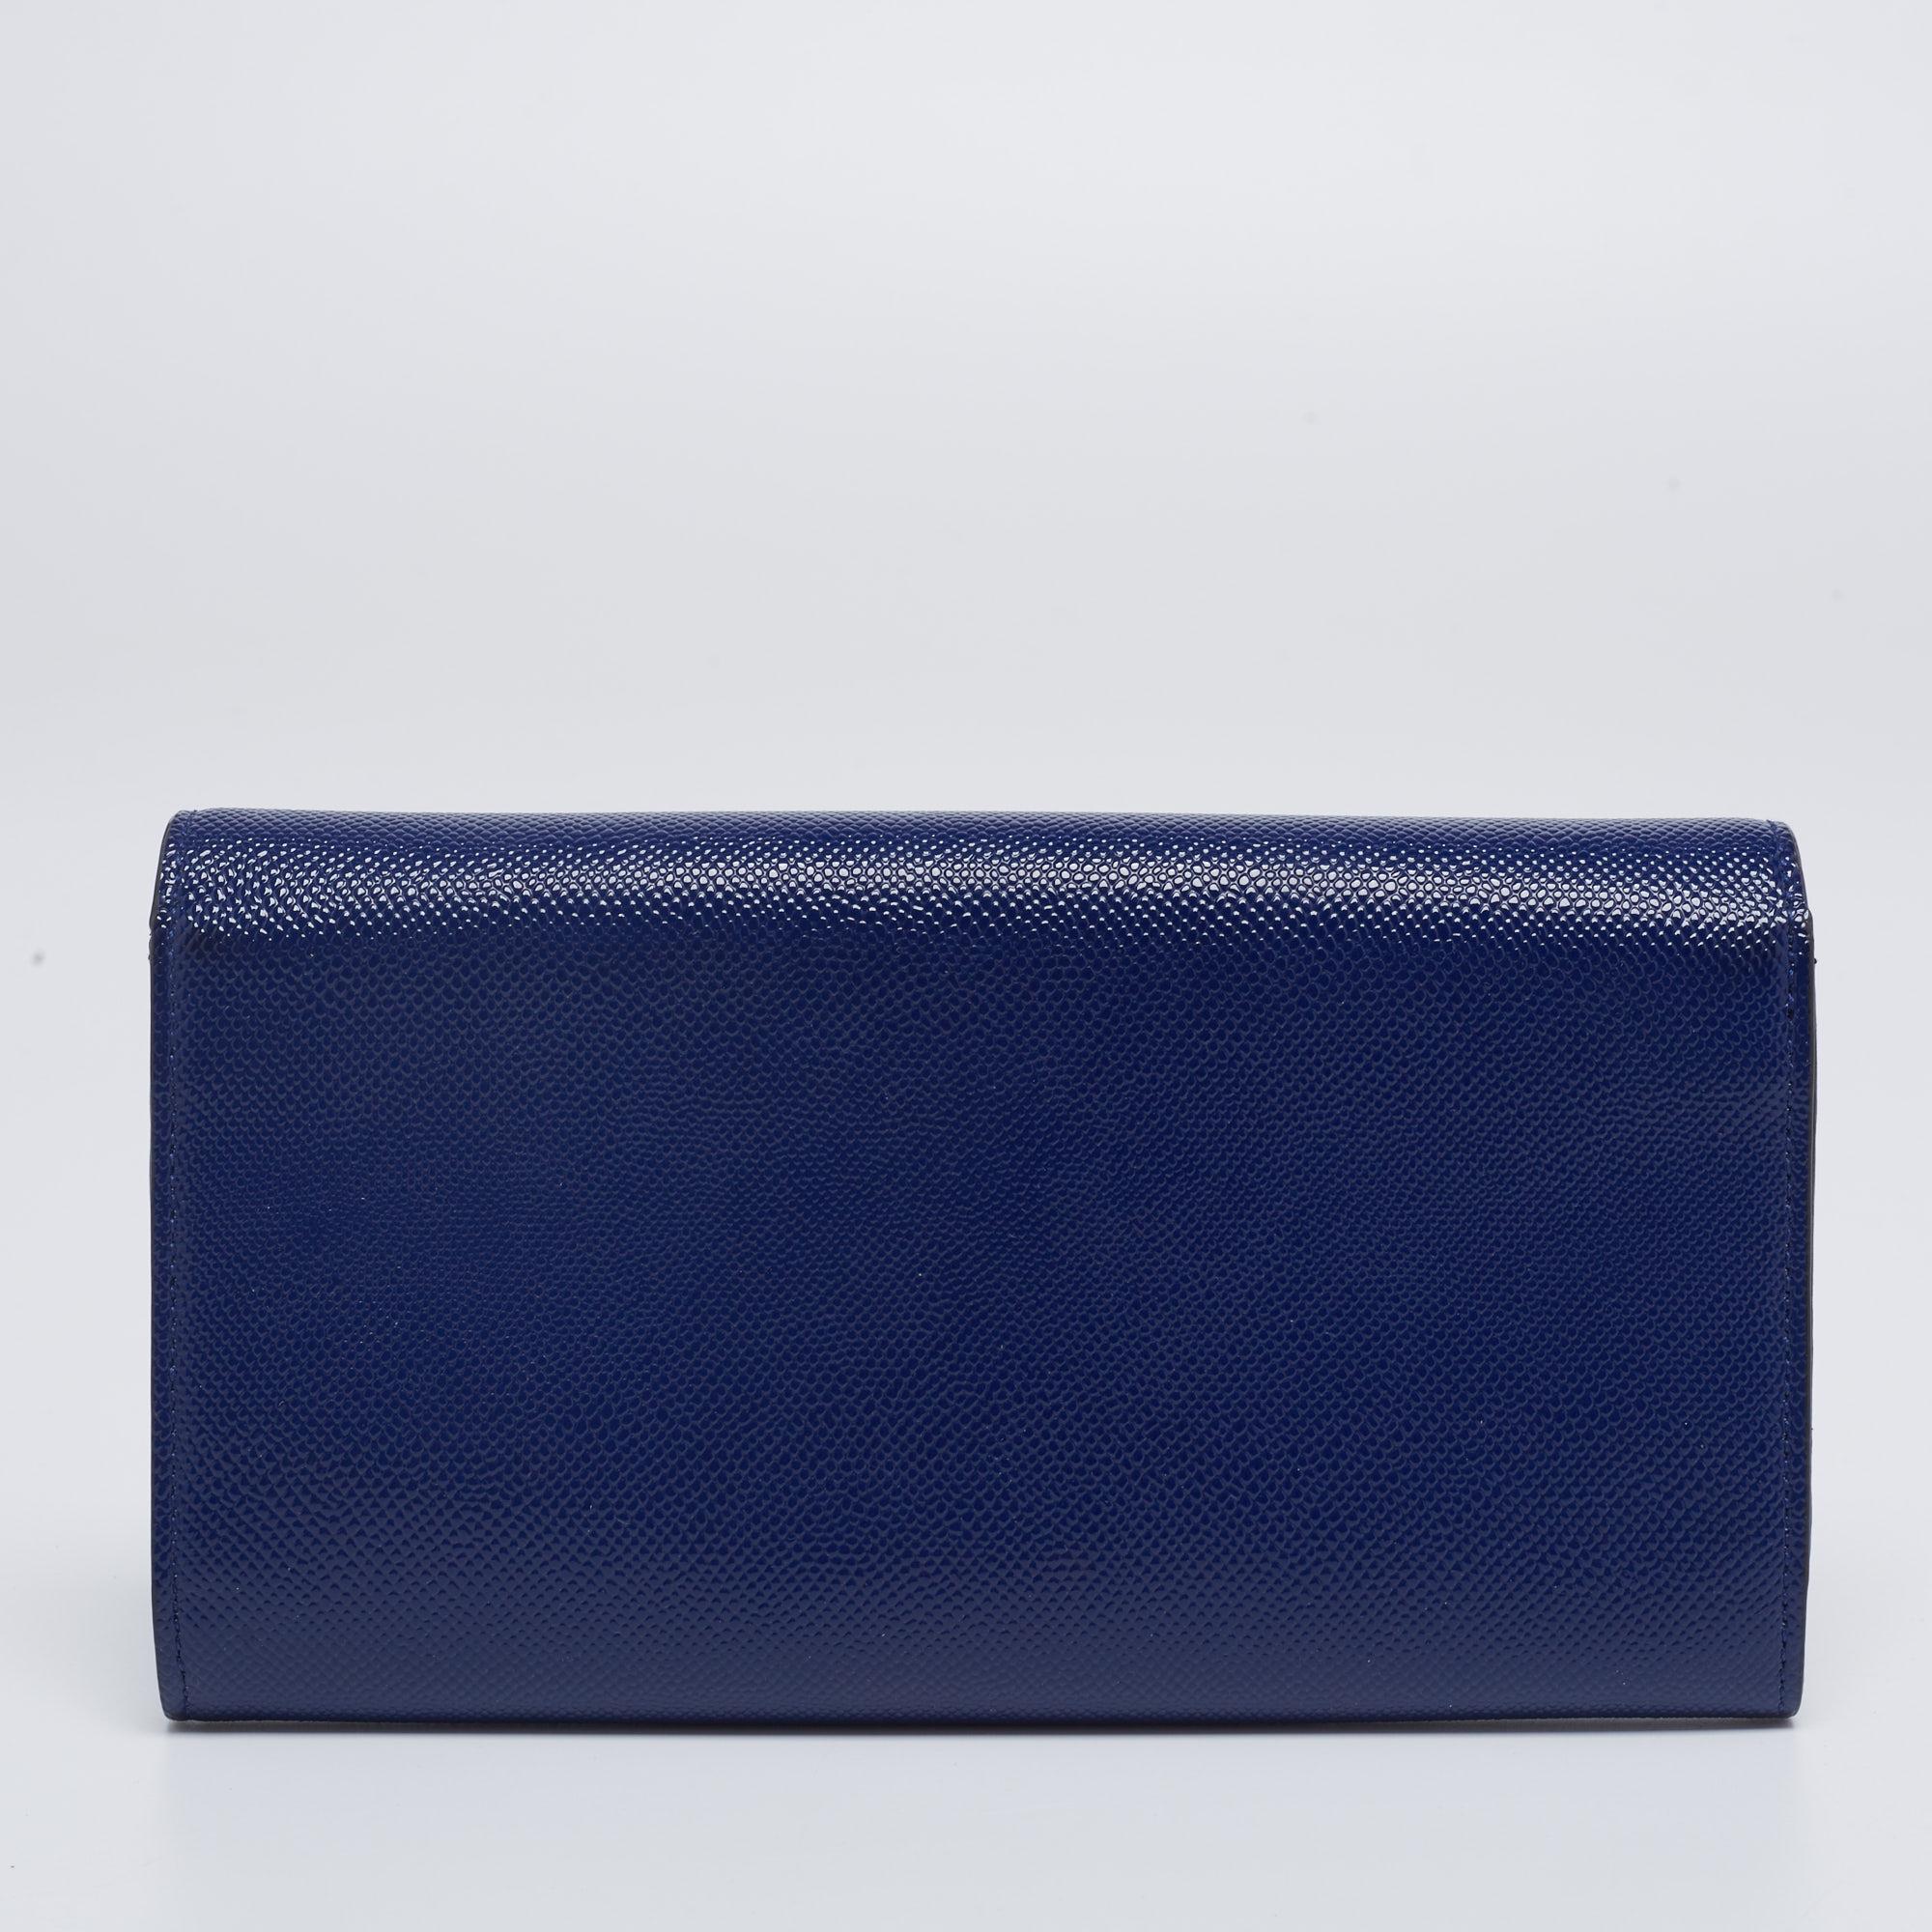 This Mania Rendez-Vous wallet from the House of Dior is both classy and chic. It showcases a navy-blue patent leather exterior, with the signature CD logo accent highlighting the front. This wallet opens to a fabric-leather interior that houses